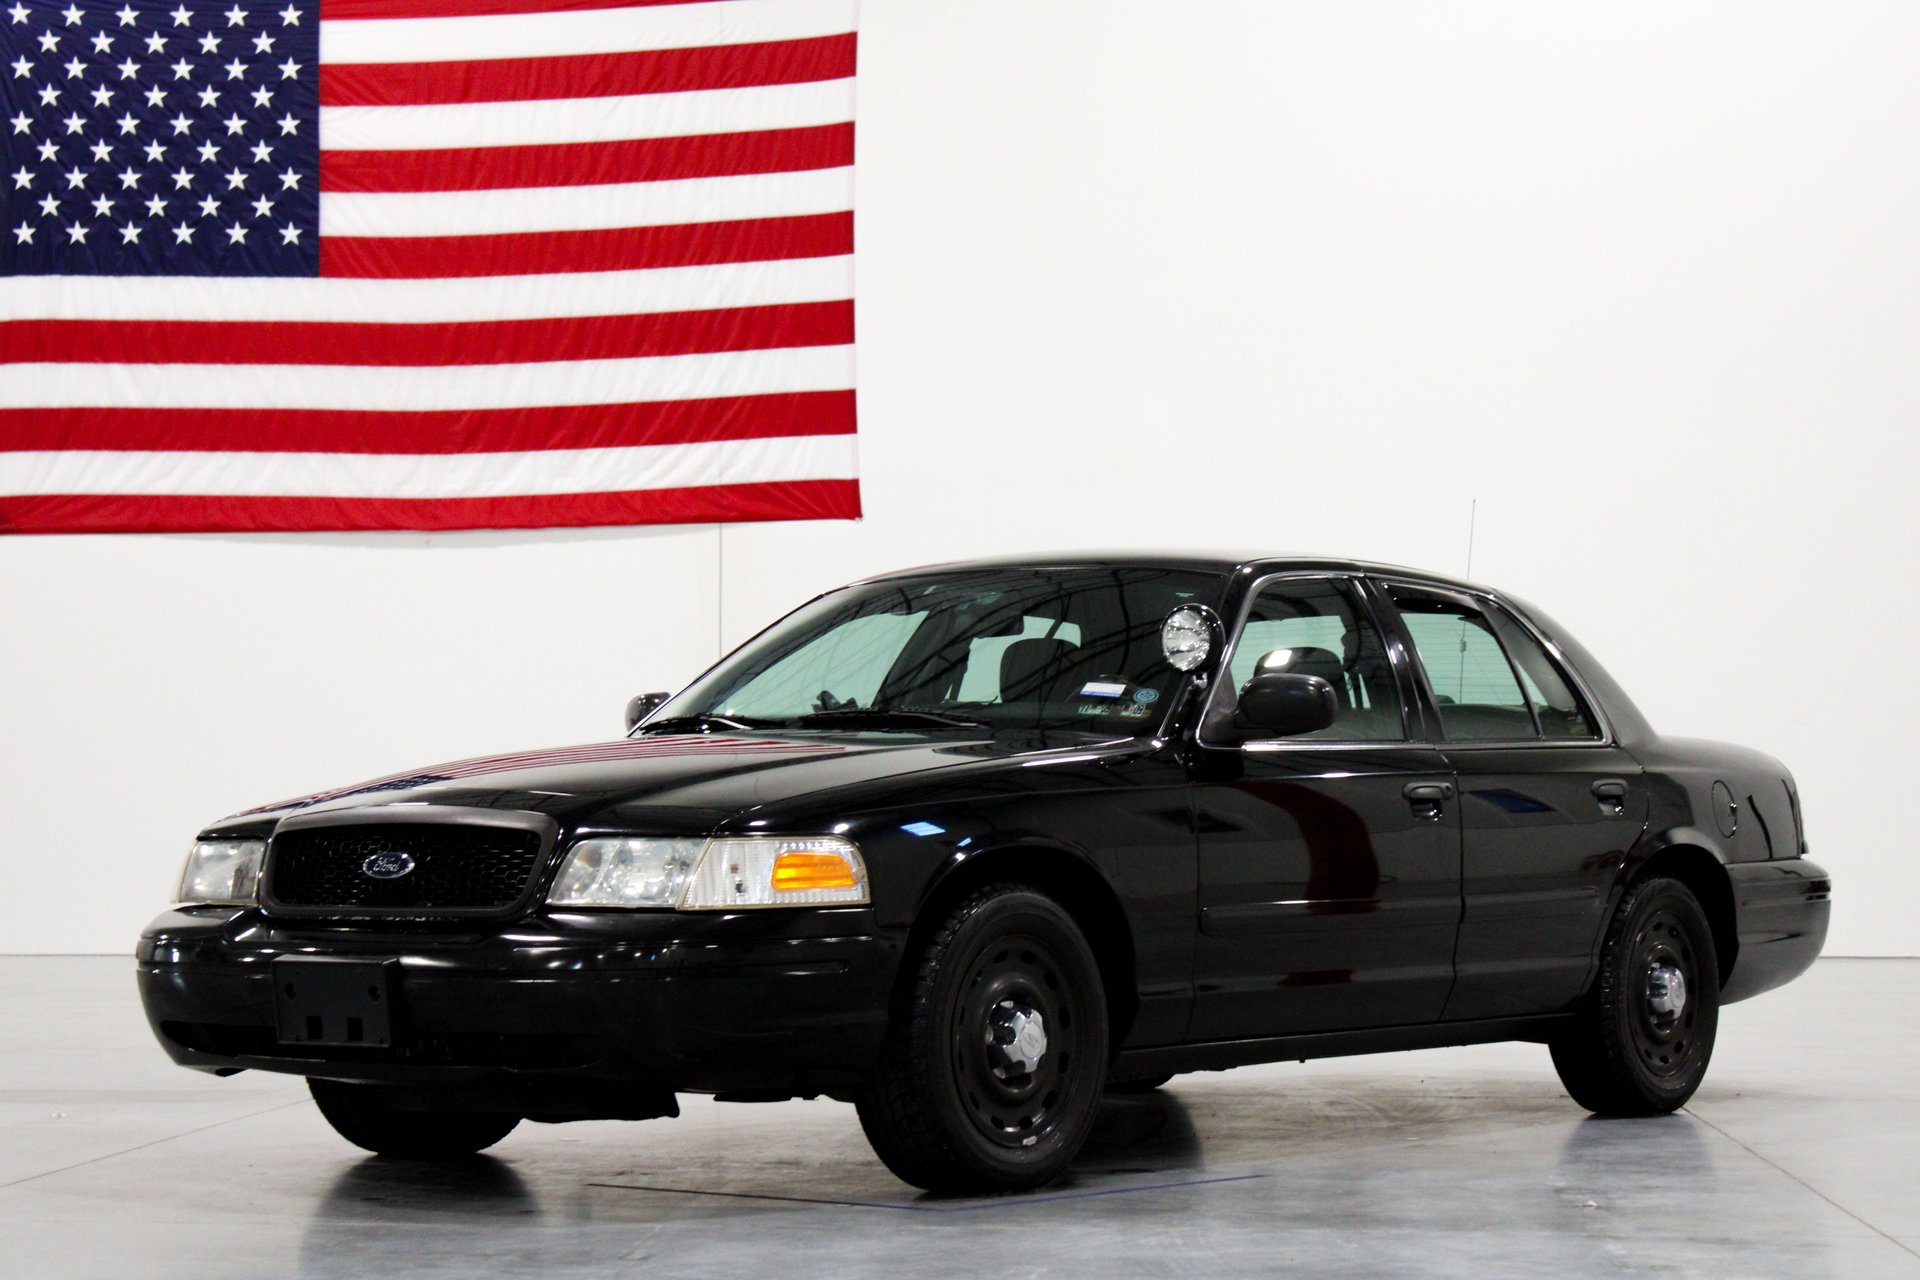 2004 Ford Crown Victoria | GR Auto Gallery